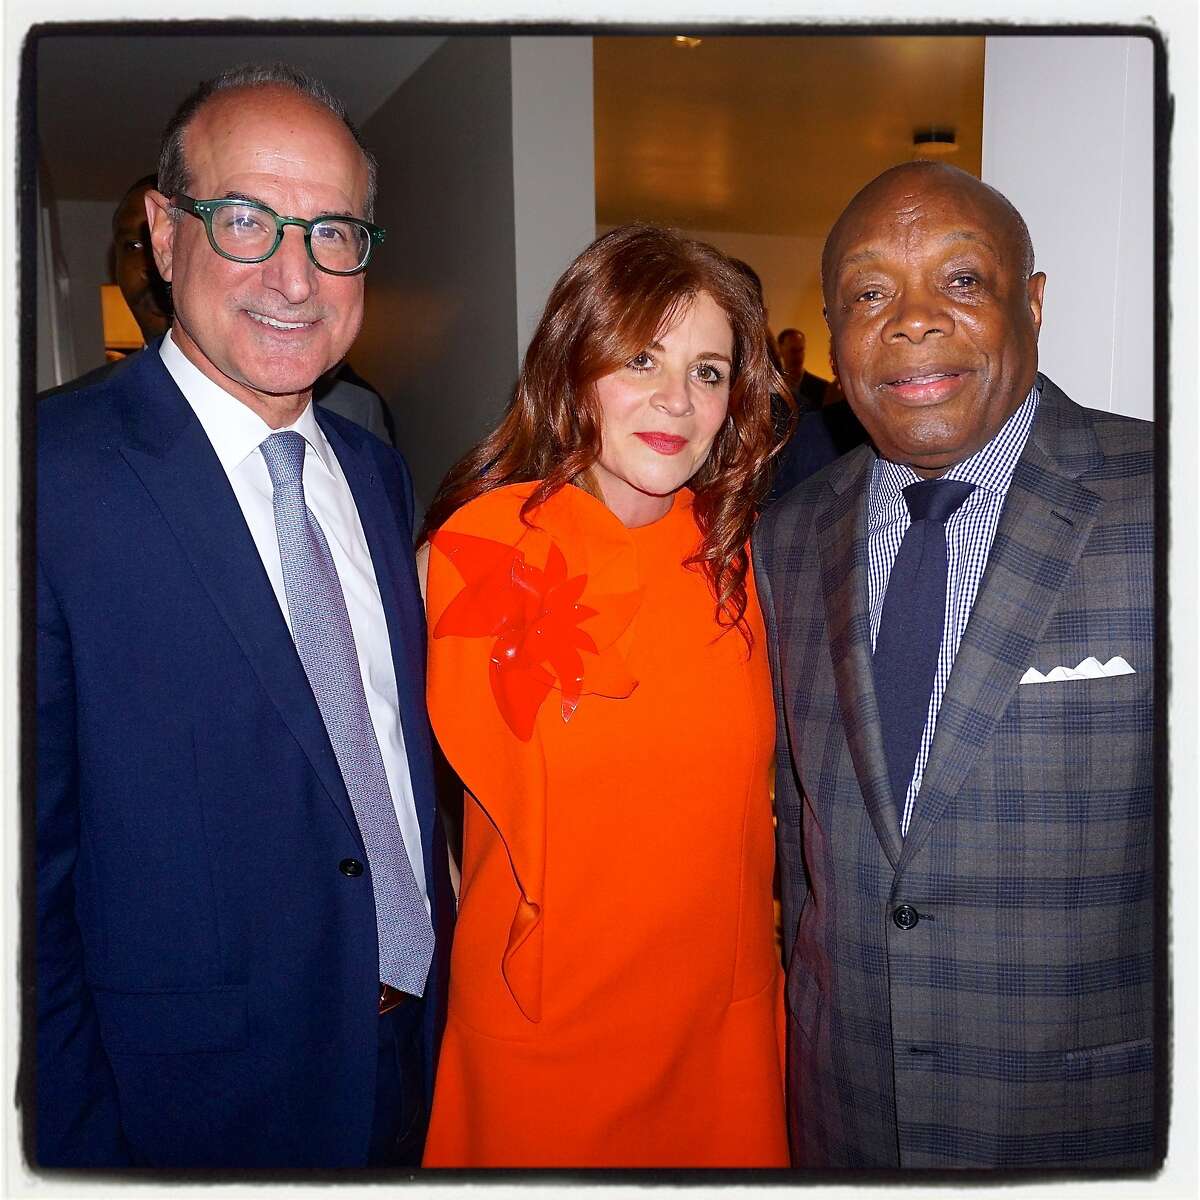 Victor and Farah Makras (left) hosted a Booker T. Washington Center fundraiser with former Mayor Willie Brown. Oct. 2016.